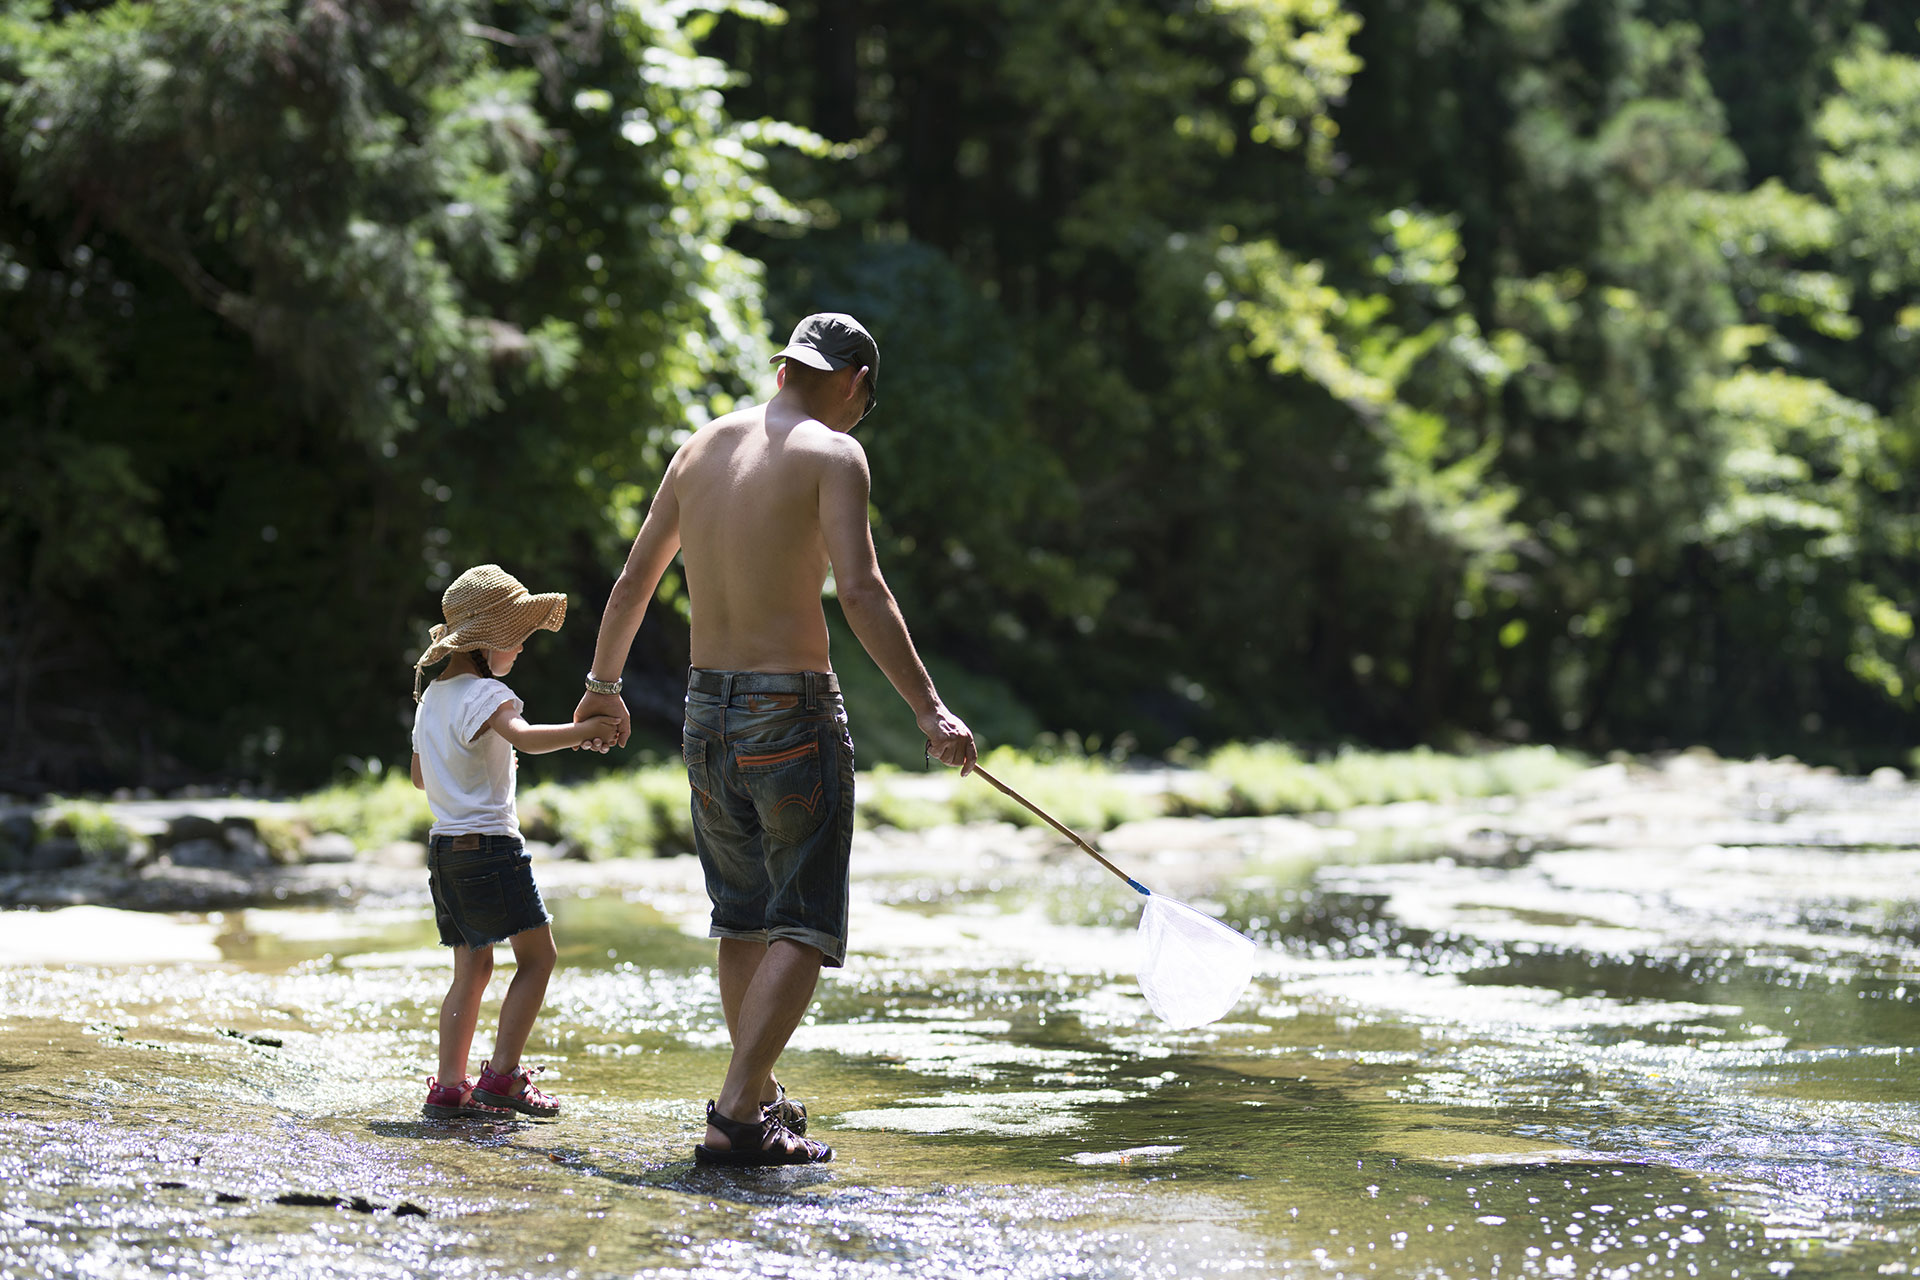 Dad and Daughter Playing in River; Courtesy of Purino/Shutterstock.com